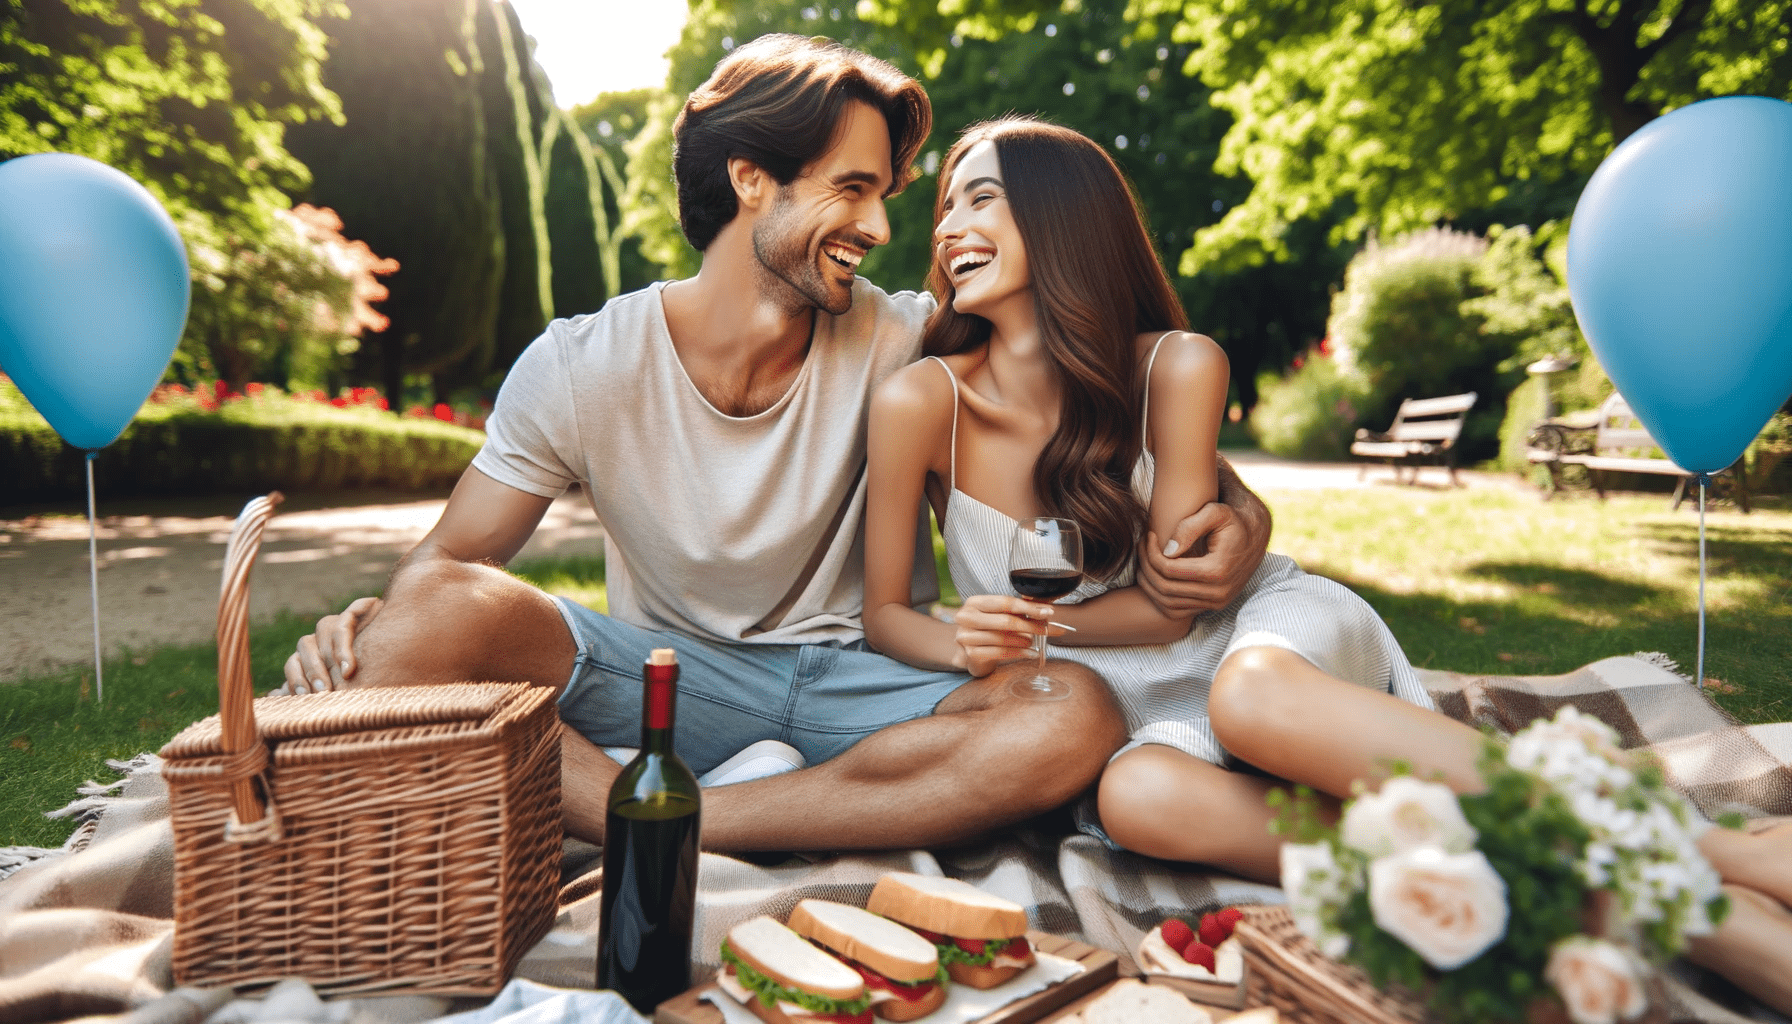 enjoying a picnic in a park on a sunny day. The man is wearing a casual t shirt and shorts while the woman is in a light summer dres